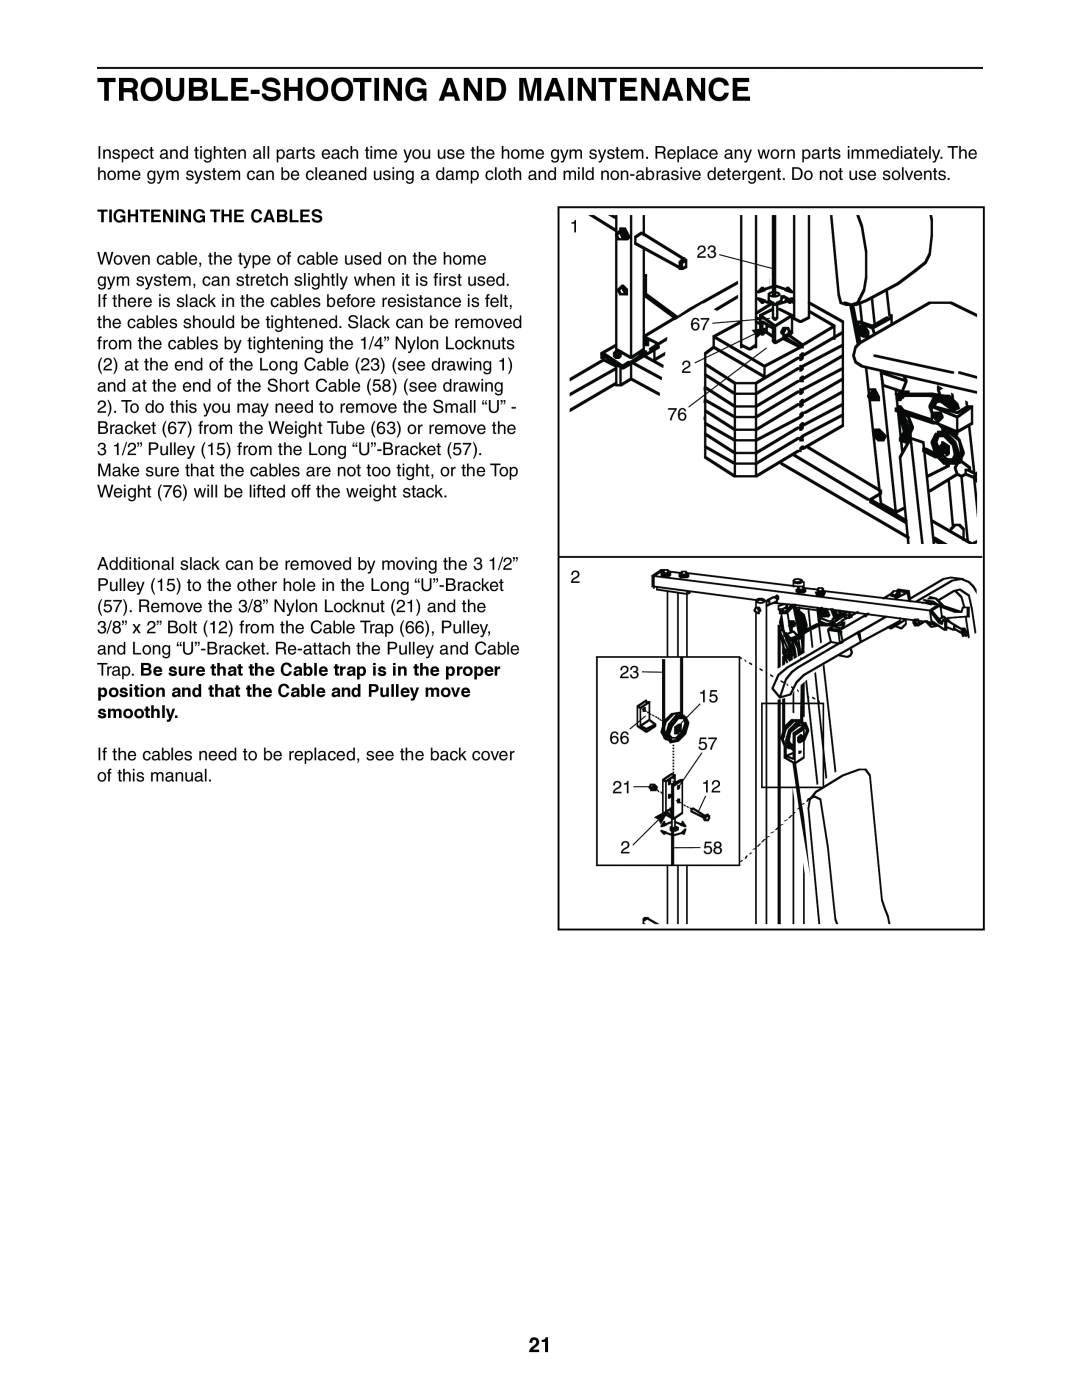 Sears 831.159460 user manual Trouble-Shooting And Maintenance, Tightening The Cables 